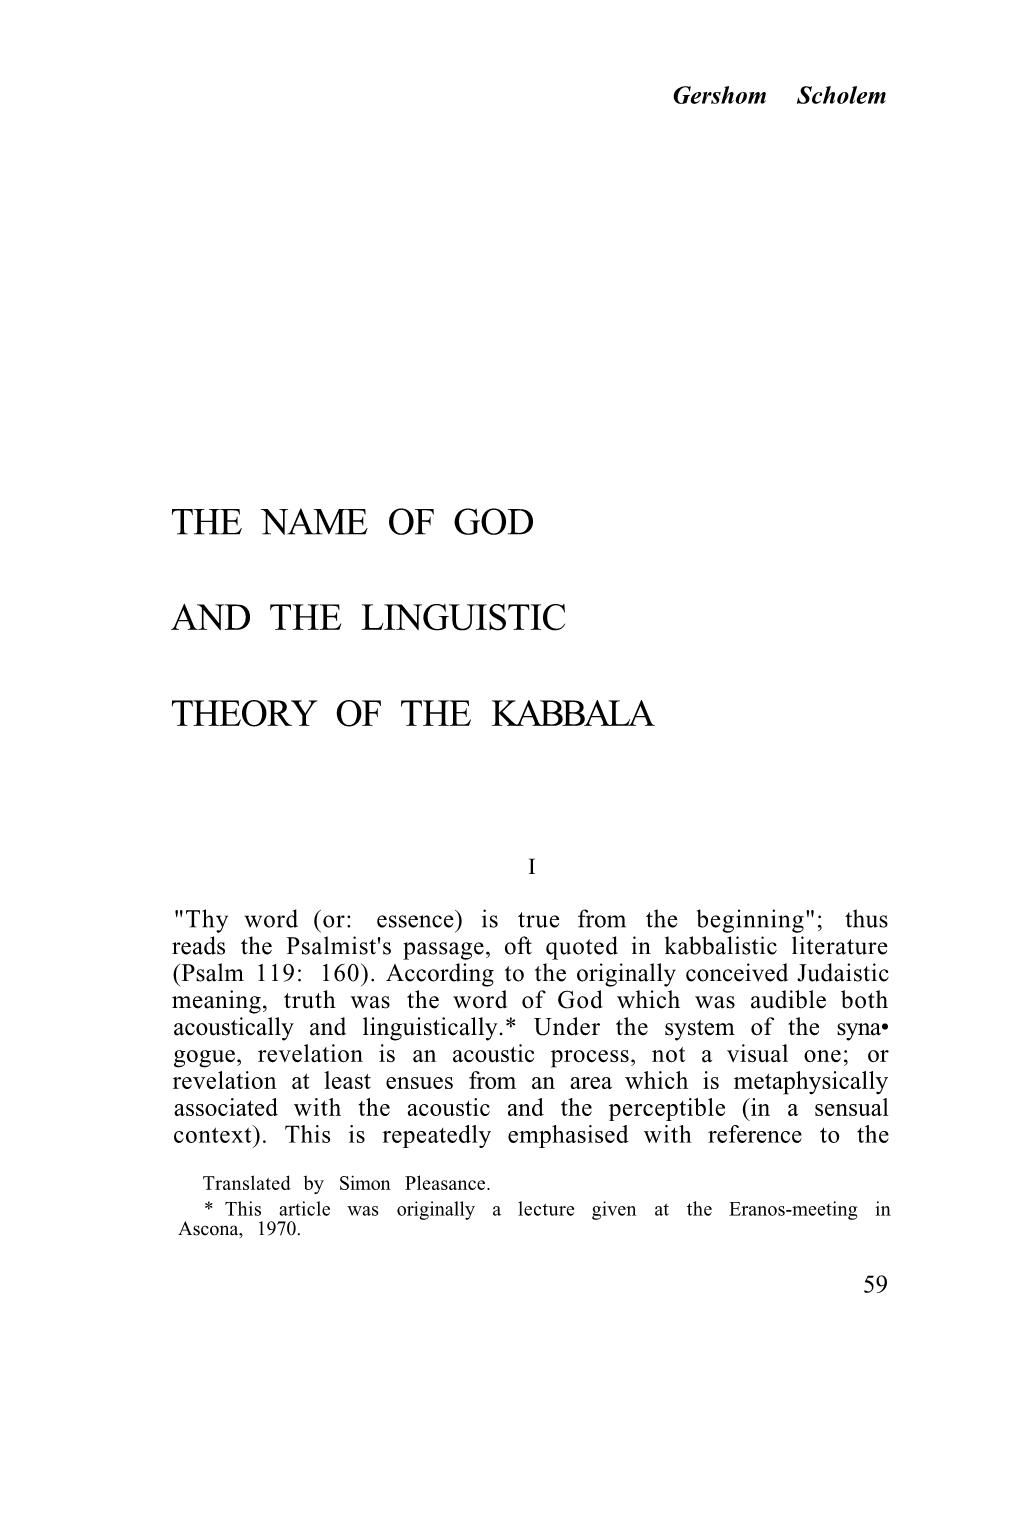 The Name of God and the Linguistic Theory of the Kabbala II